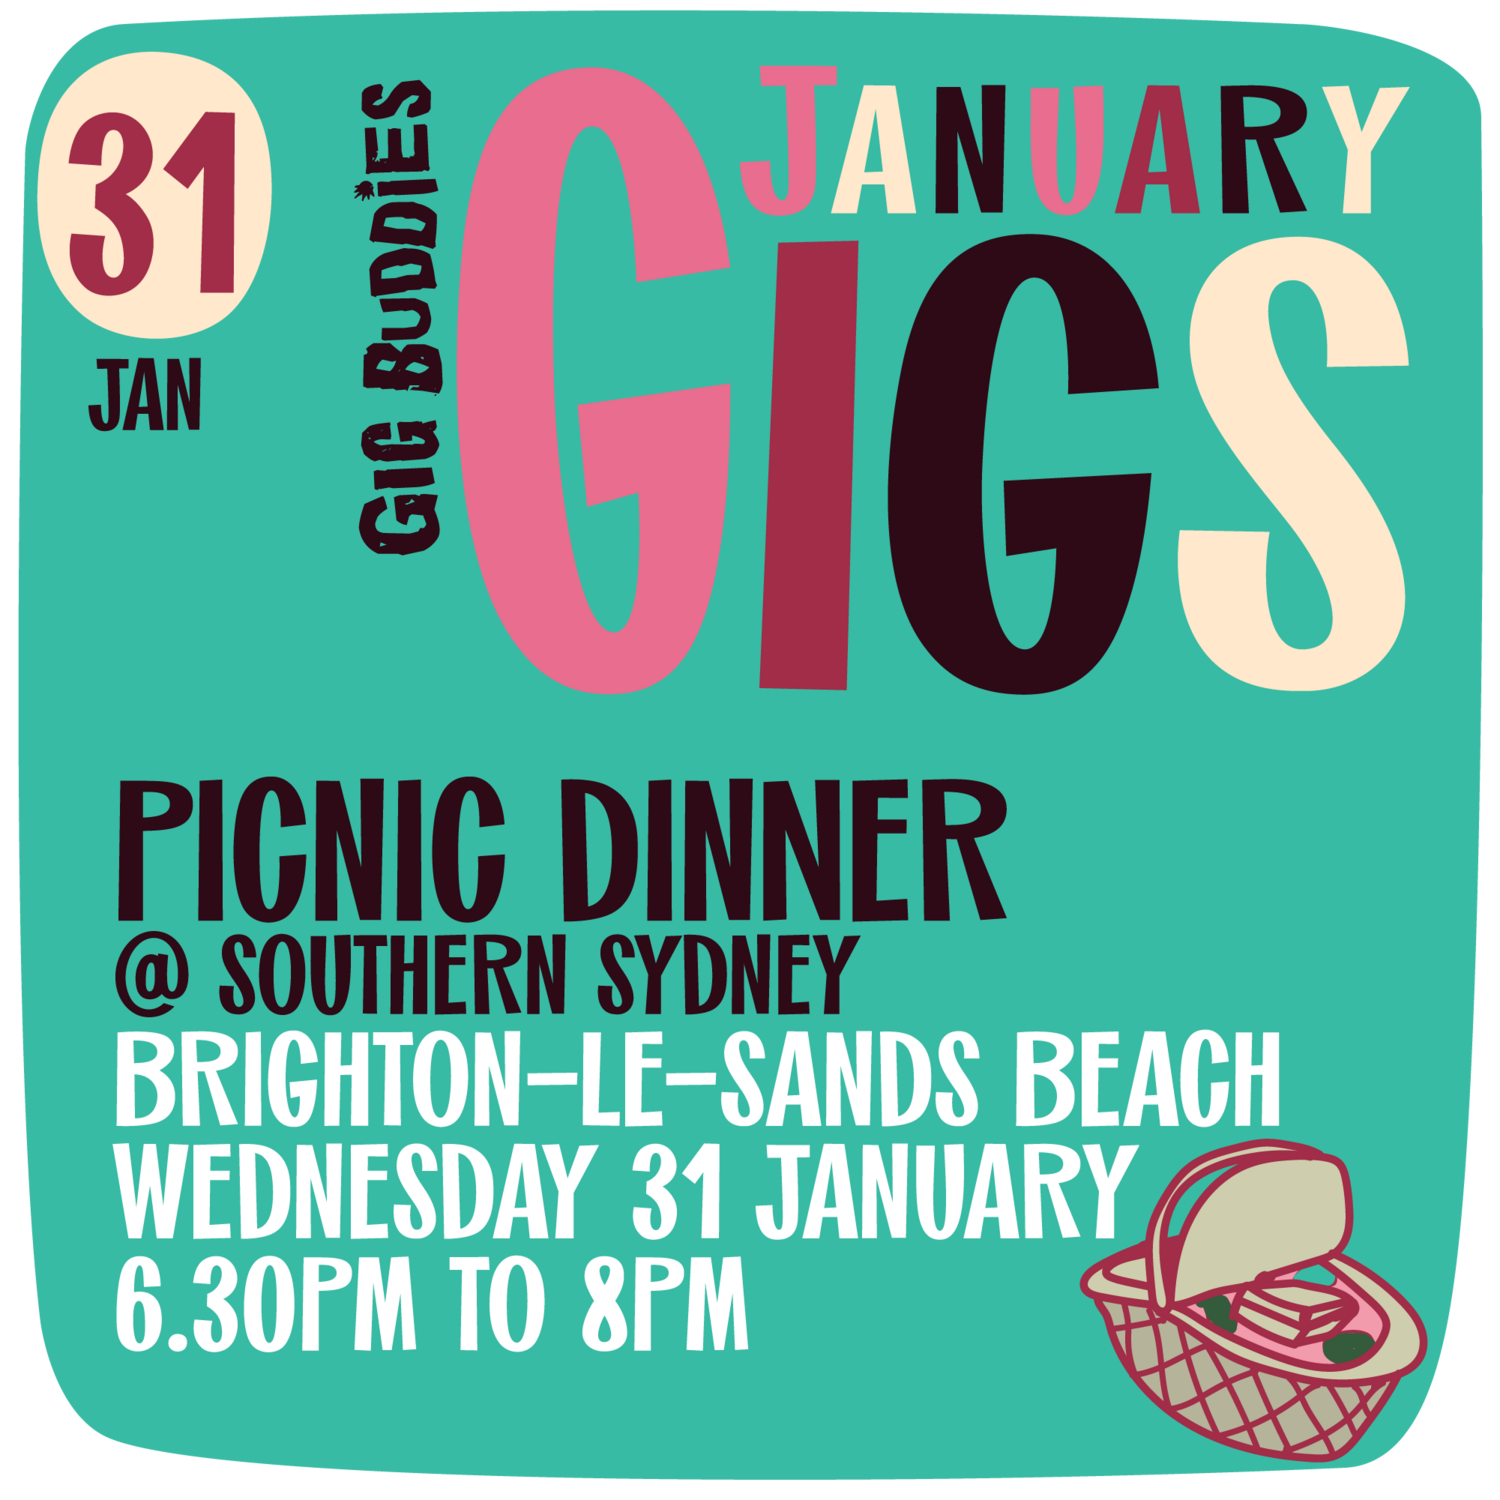 Picnic Dinner at Brighton-Le-Sands Beach - Wednesday 31 January